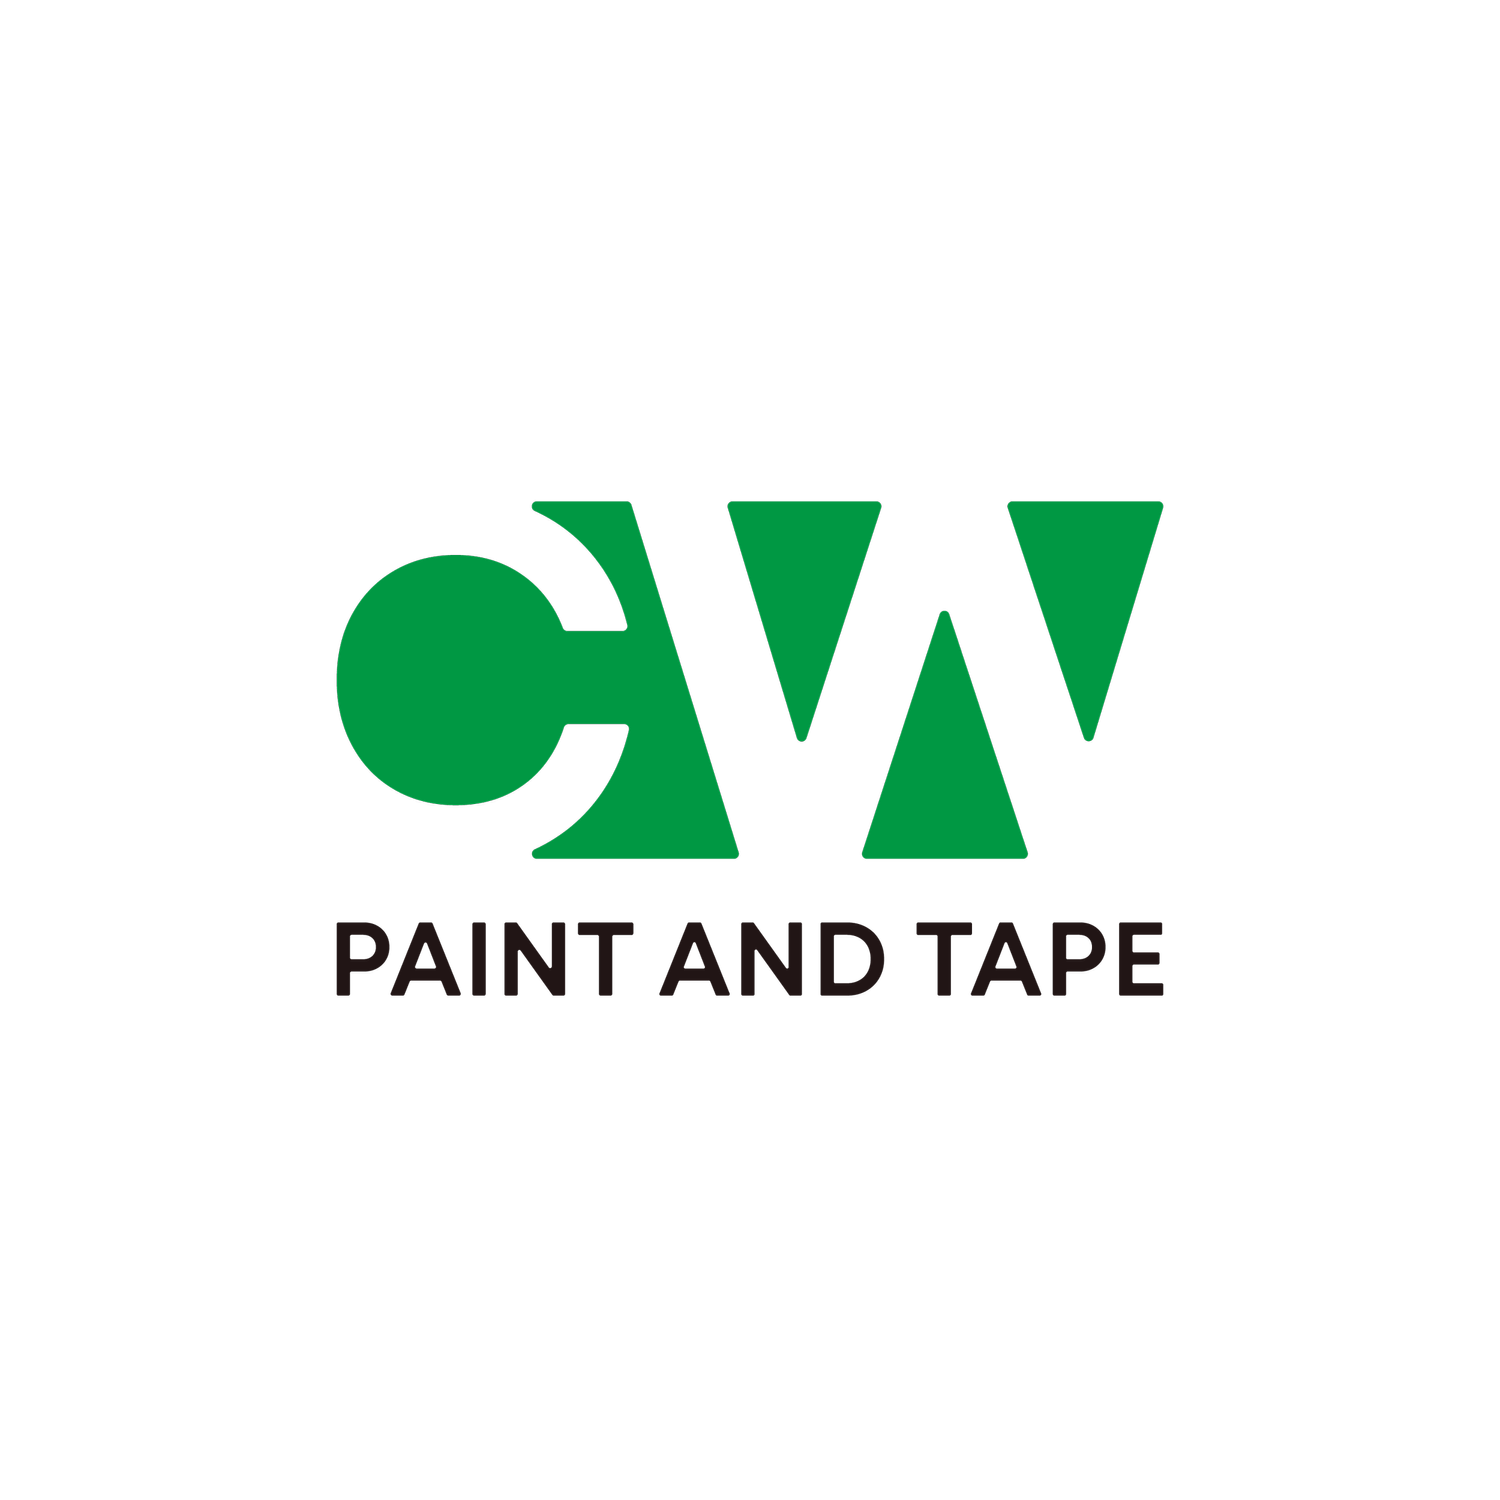 CW Paint and Tape